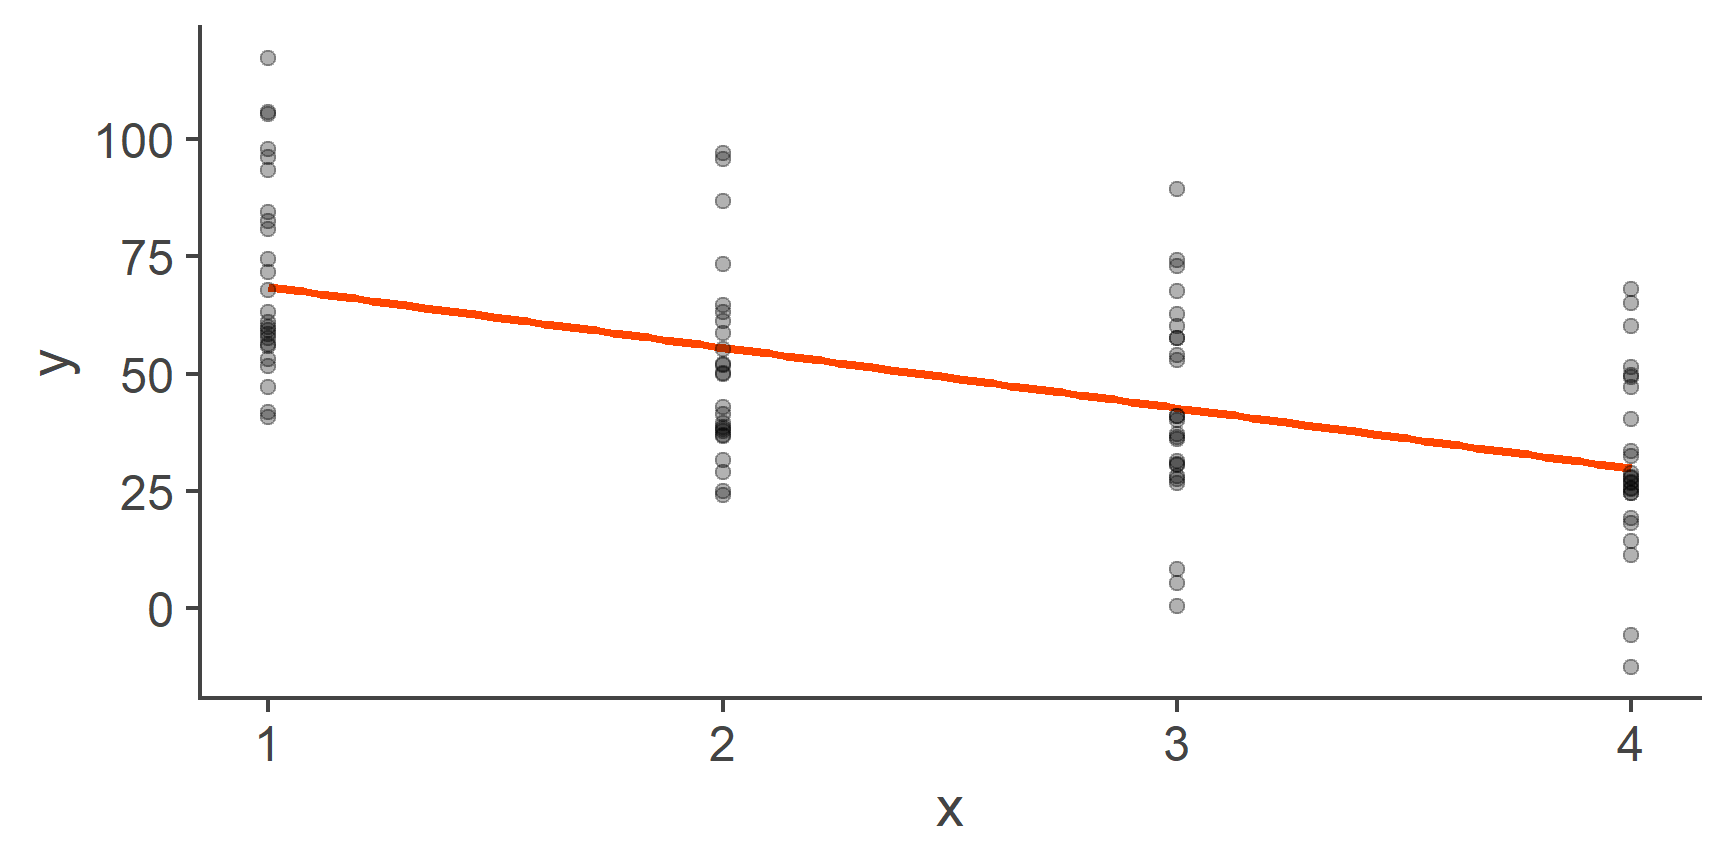 Fitting a line through categorical data